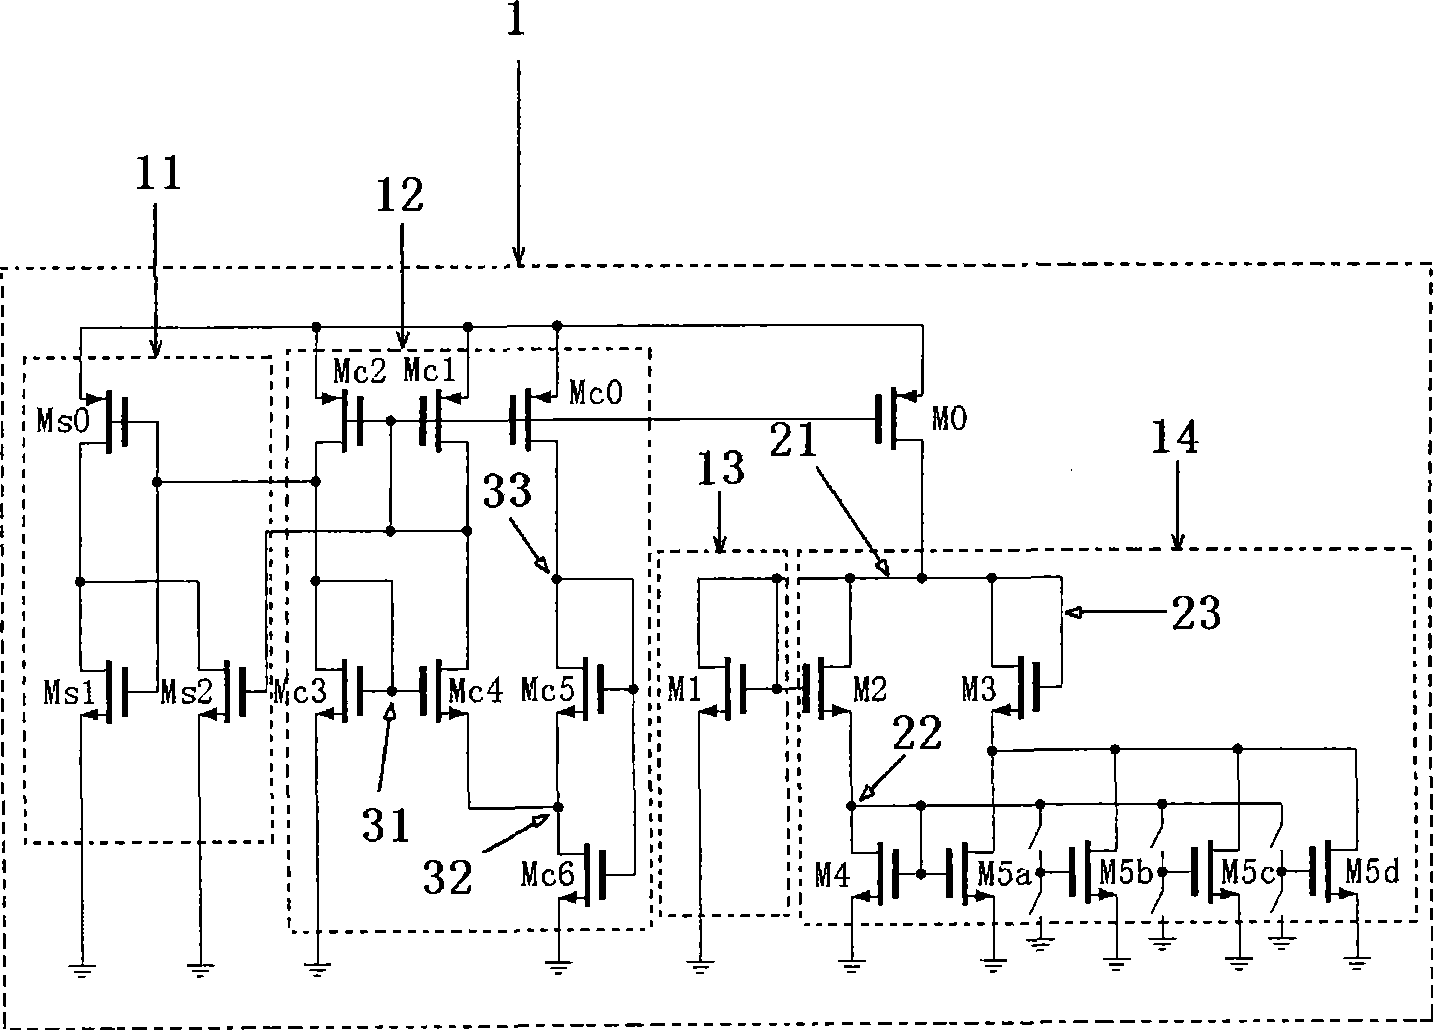 Low-voltage low-power consumption CMOS voltage reference circuit